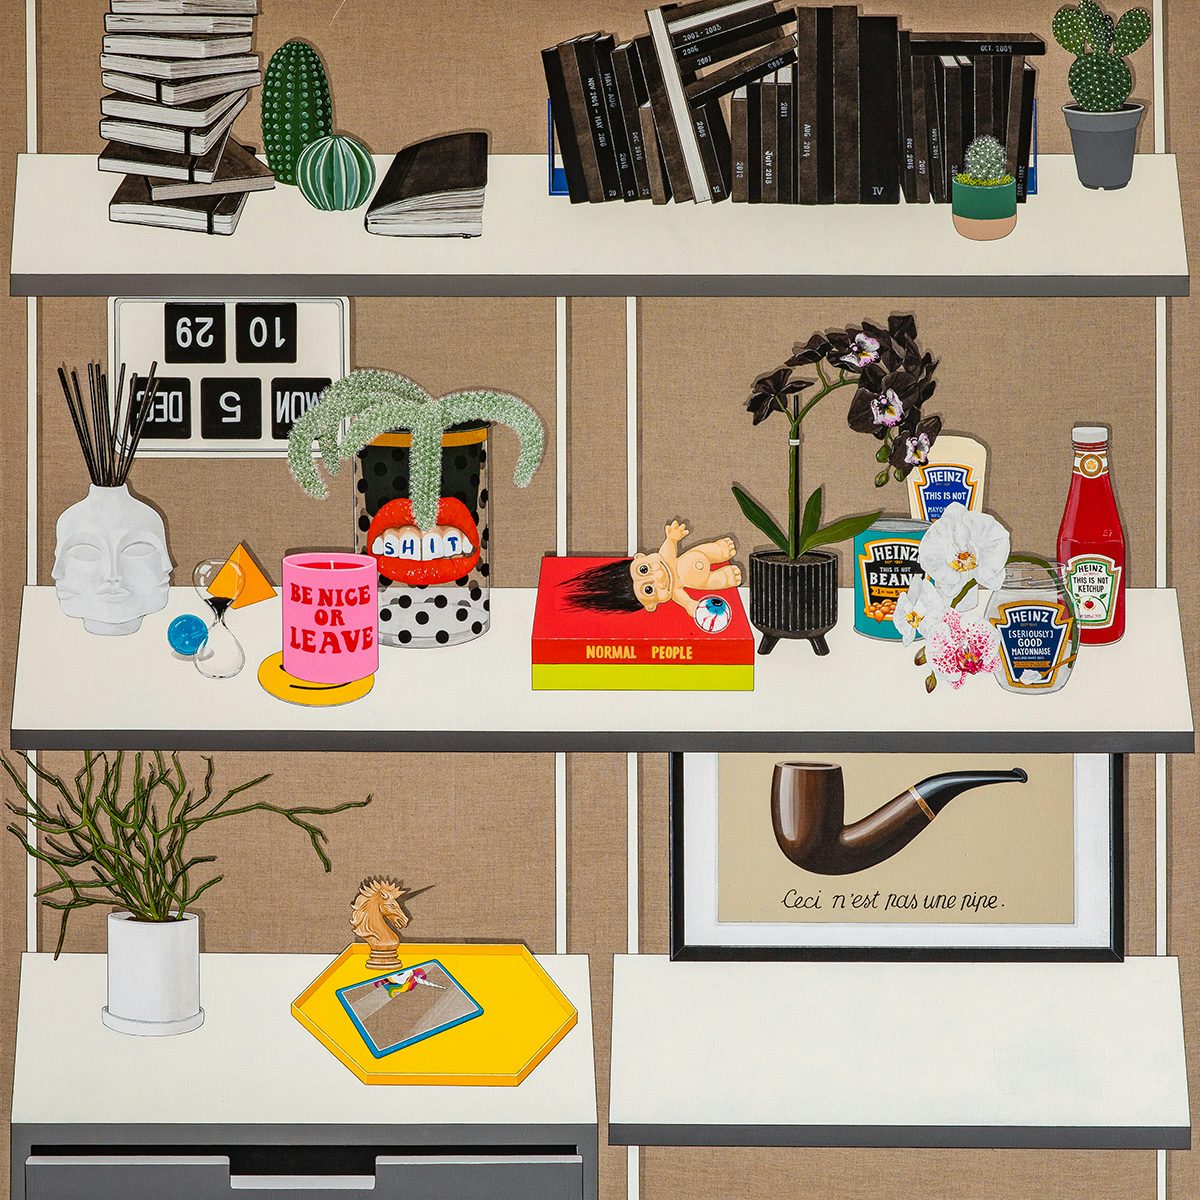 Painting by Sooyoung Chung showing objects arranged across three shelves, including a rendition of Ceci n'est pas une pipe, a collection of books, a vase of flowers, a troll doll, and a mug that reads 'be nice or leave'